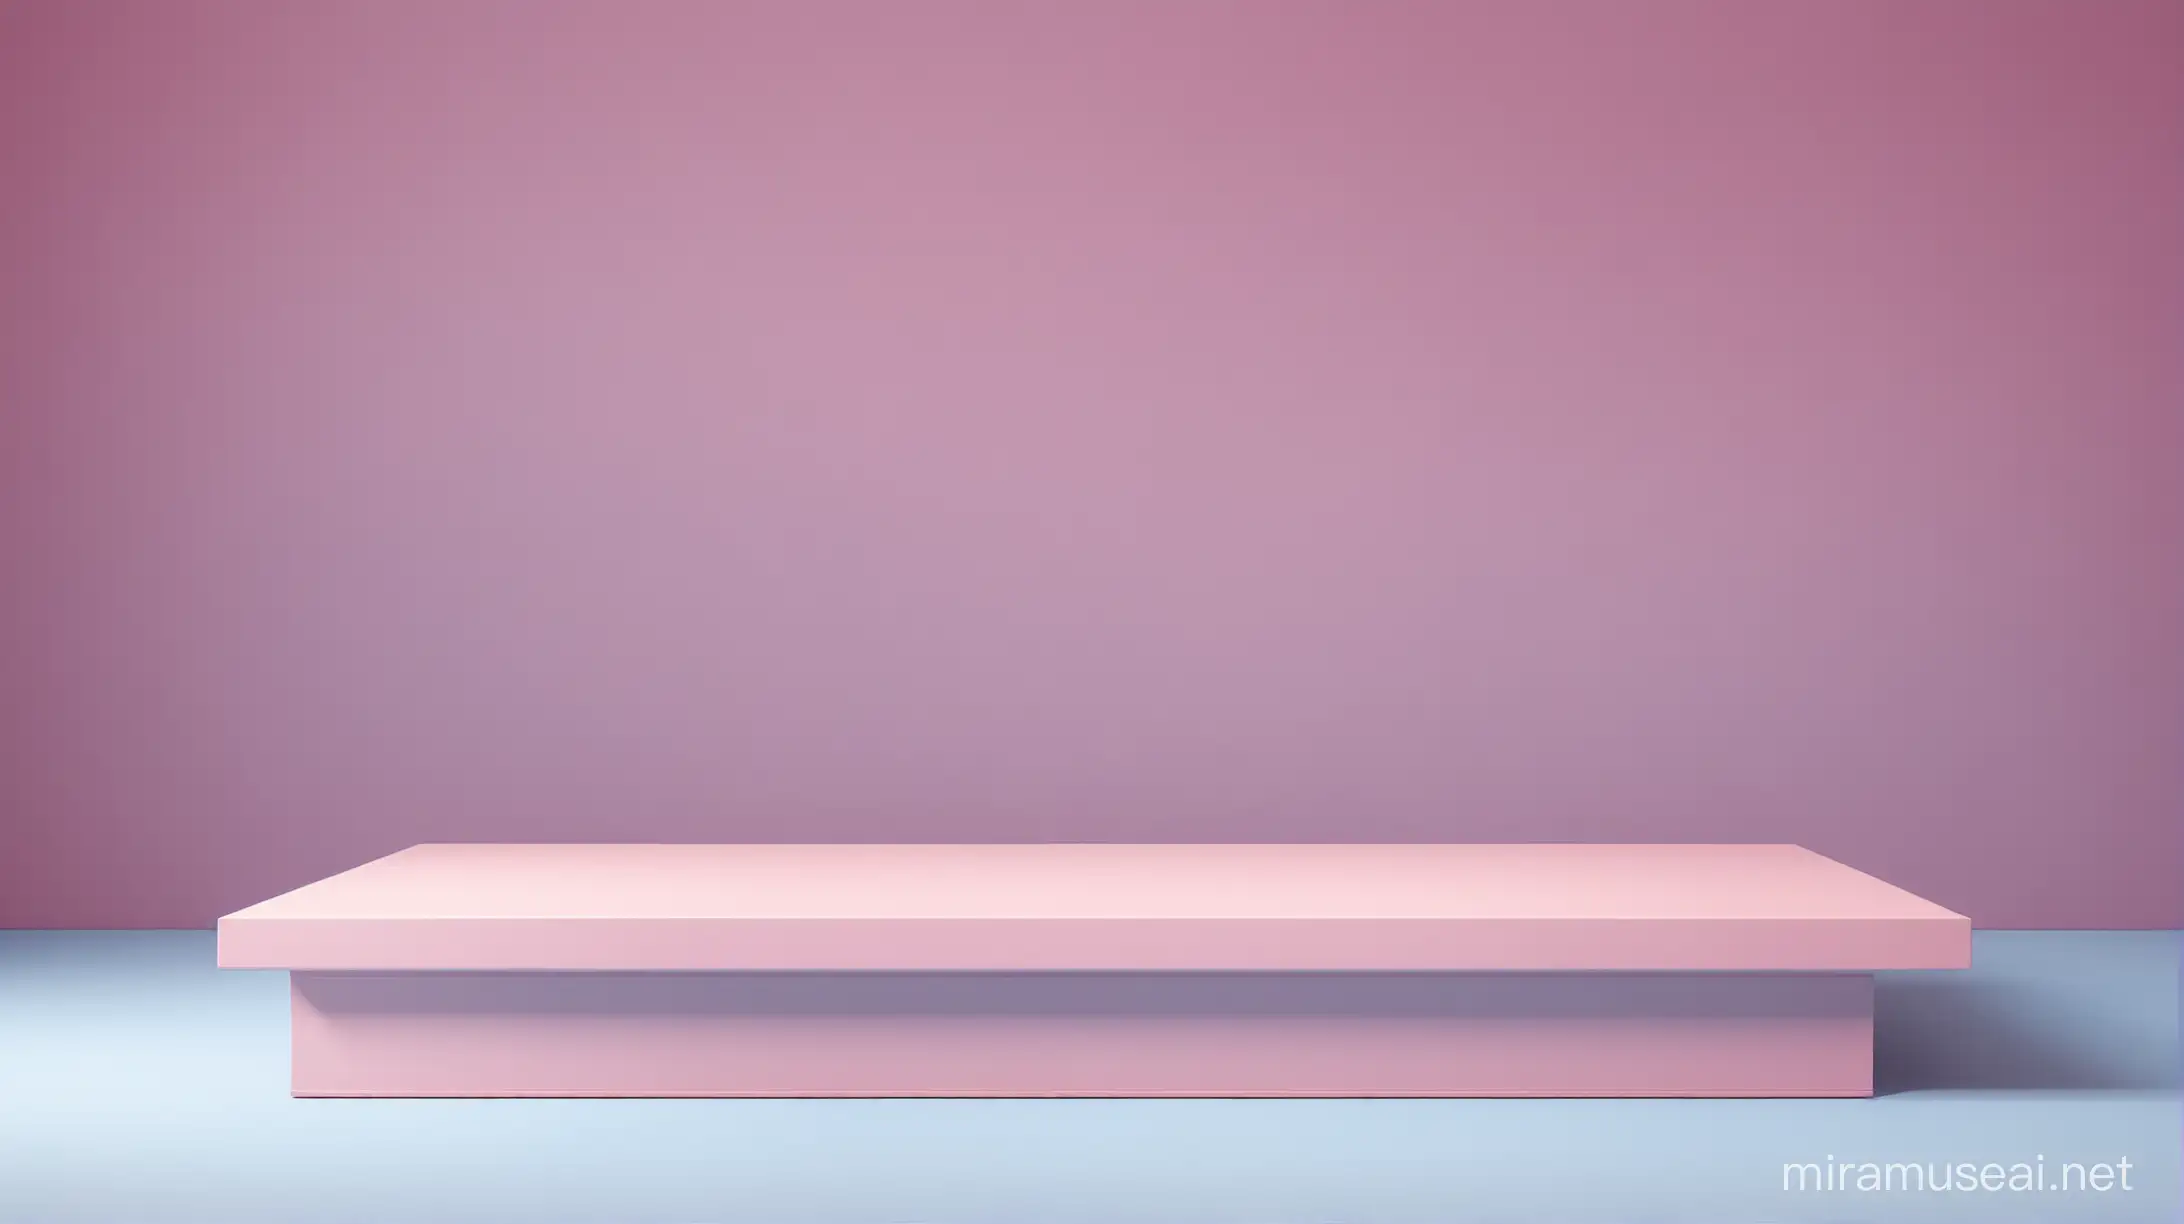 Serene Pink and Blue Background with Foreground Platform